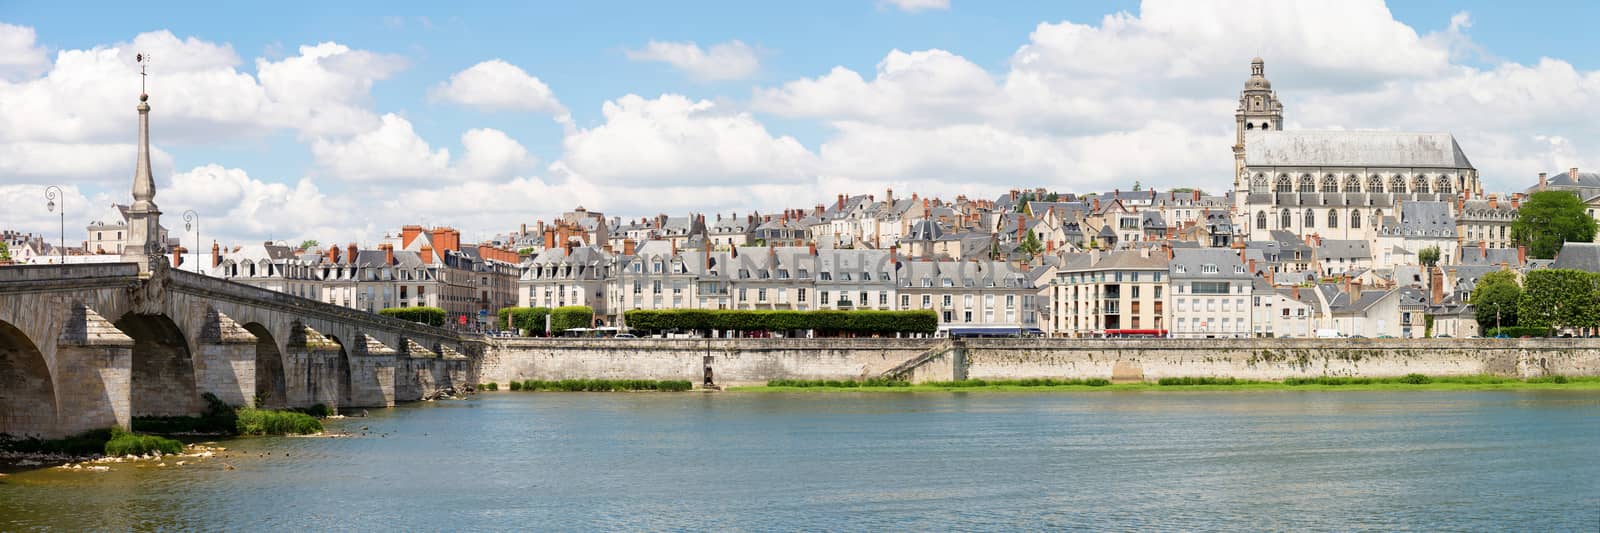 Blois Cityscape Panorama France by vichie81